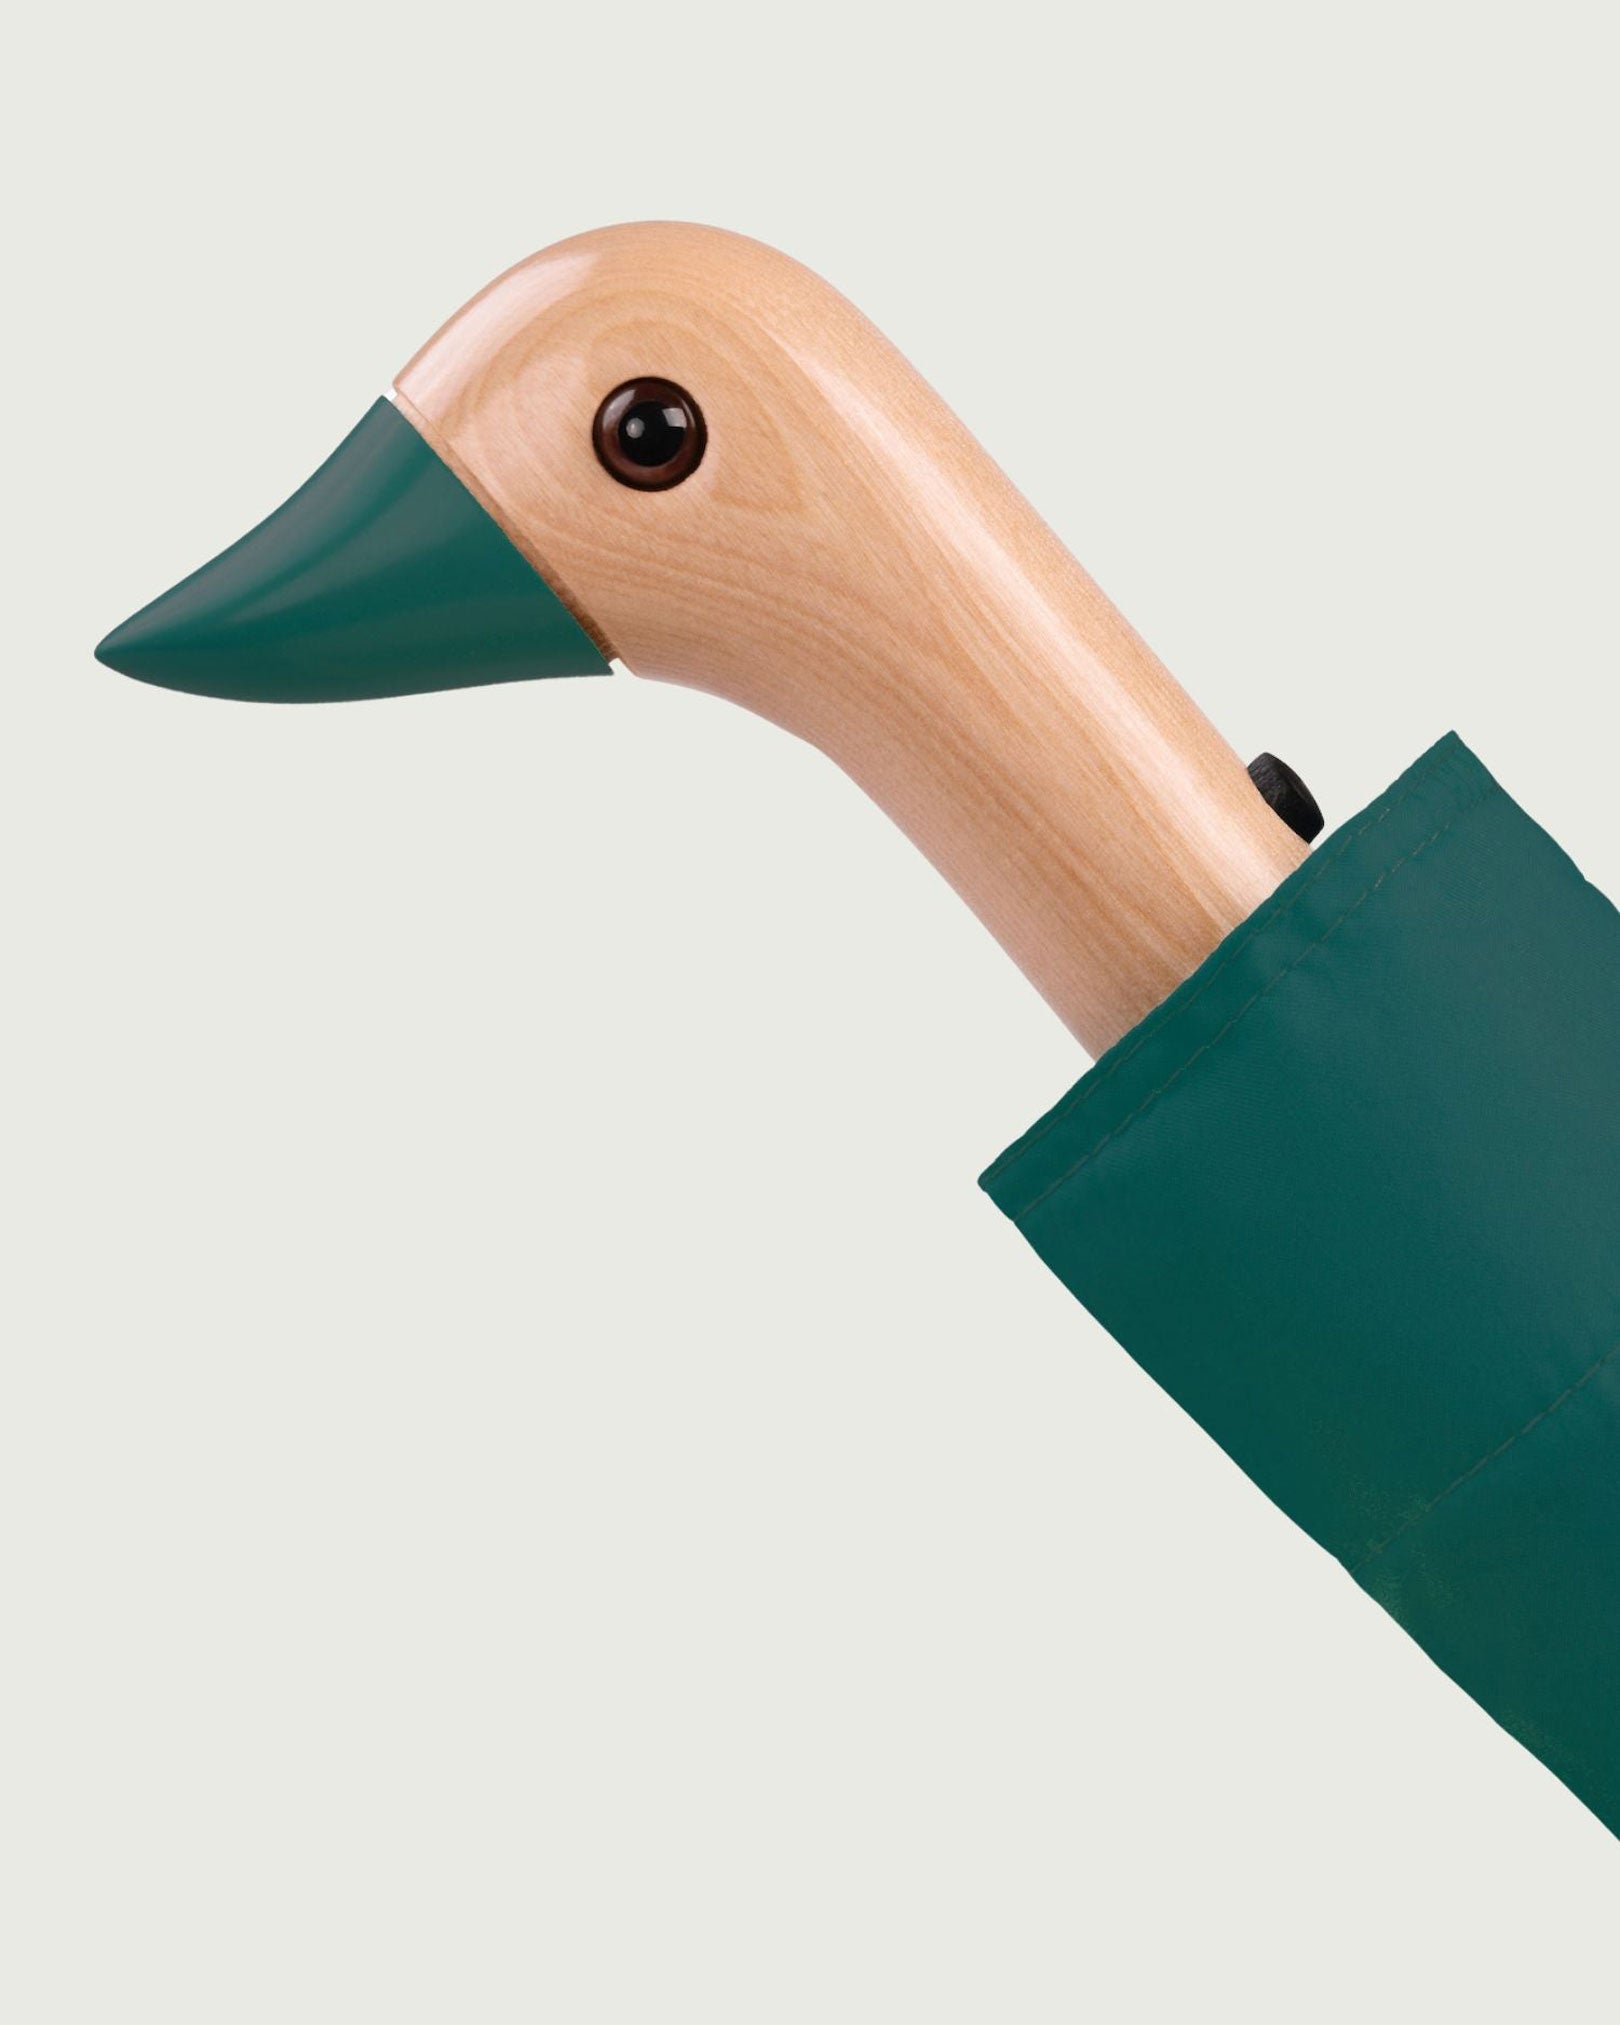 ORIGINAL DUCKHEAD Compact Umbrella in Forest available at Lahn.shop